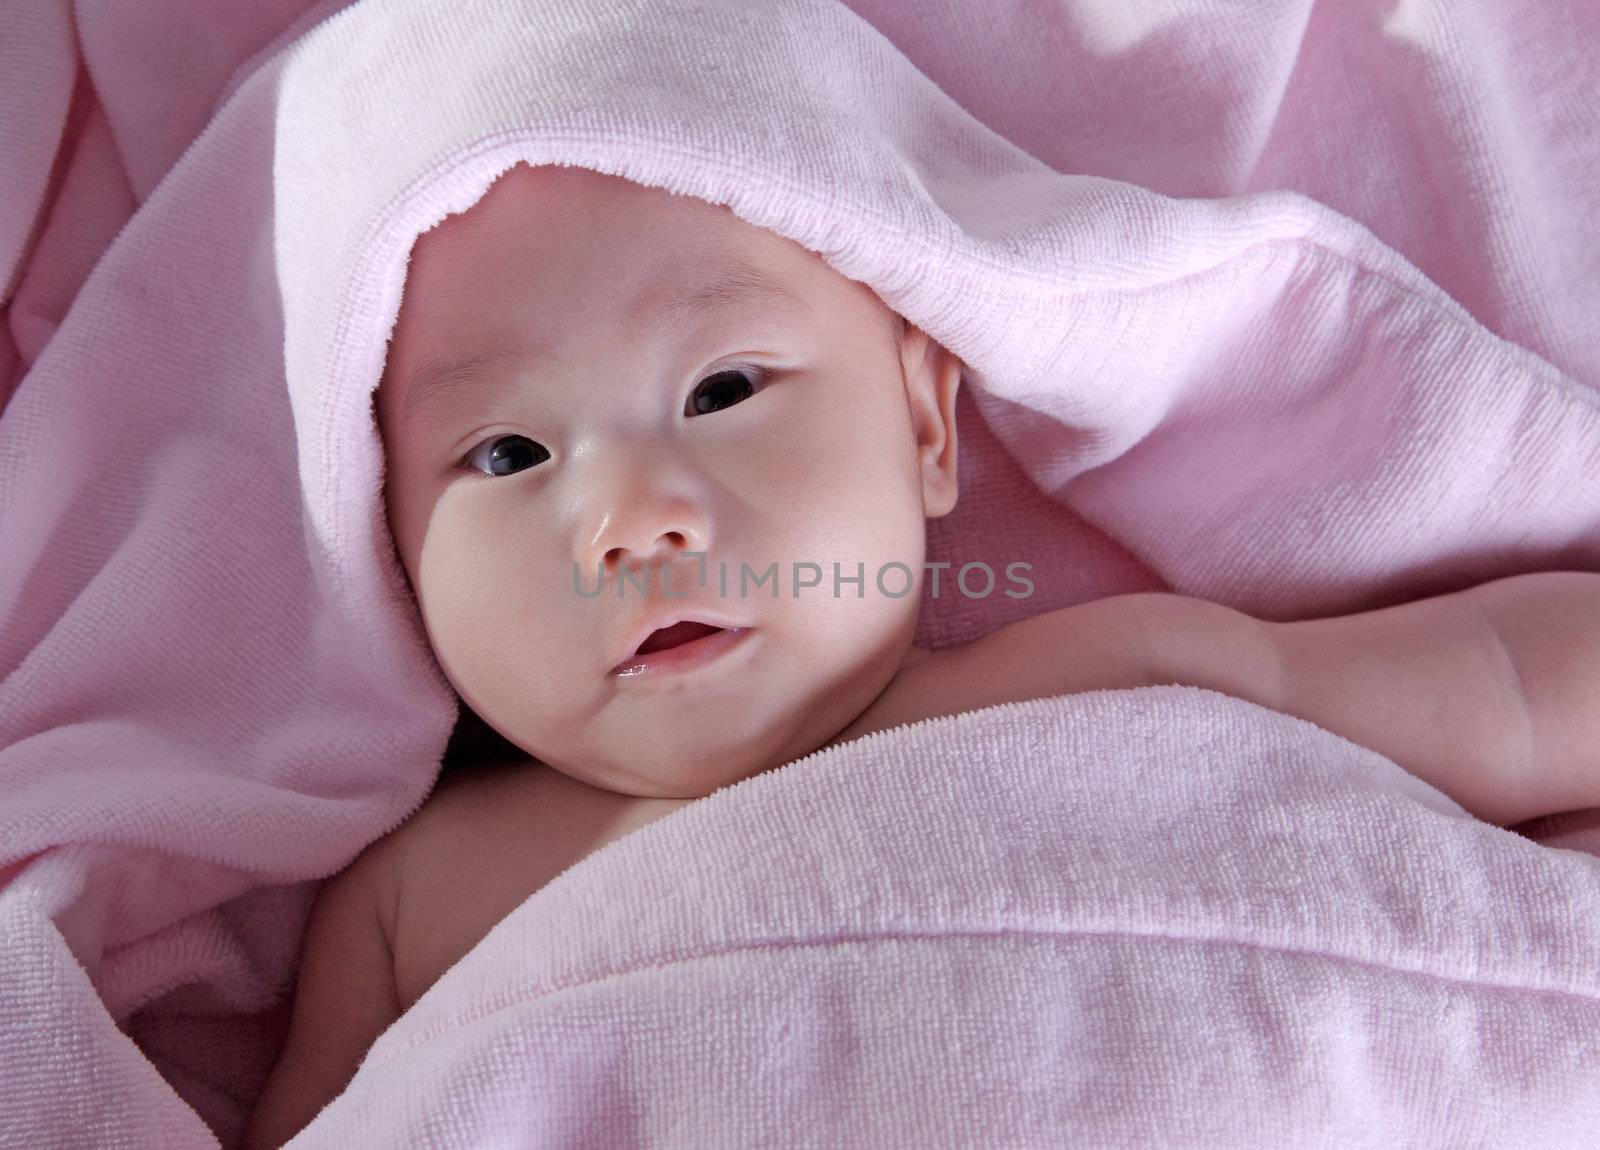 baby after bath by duron123